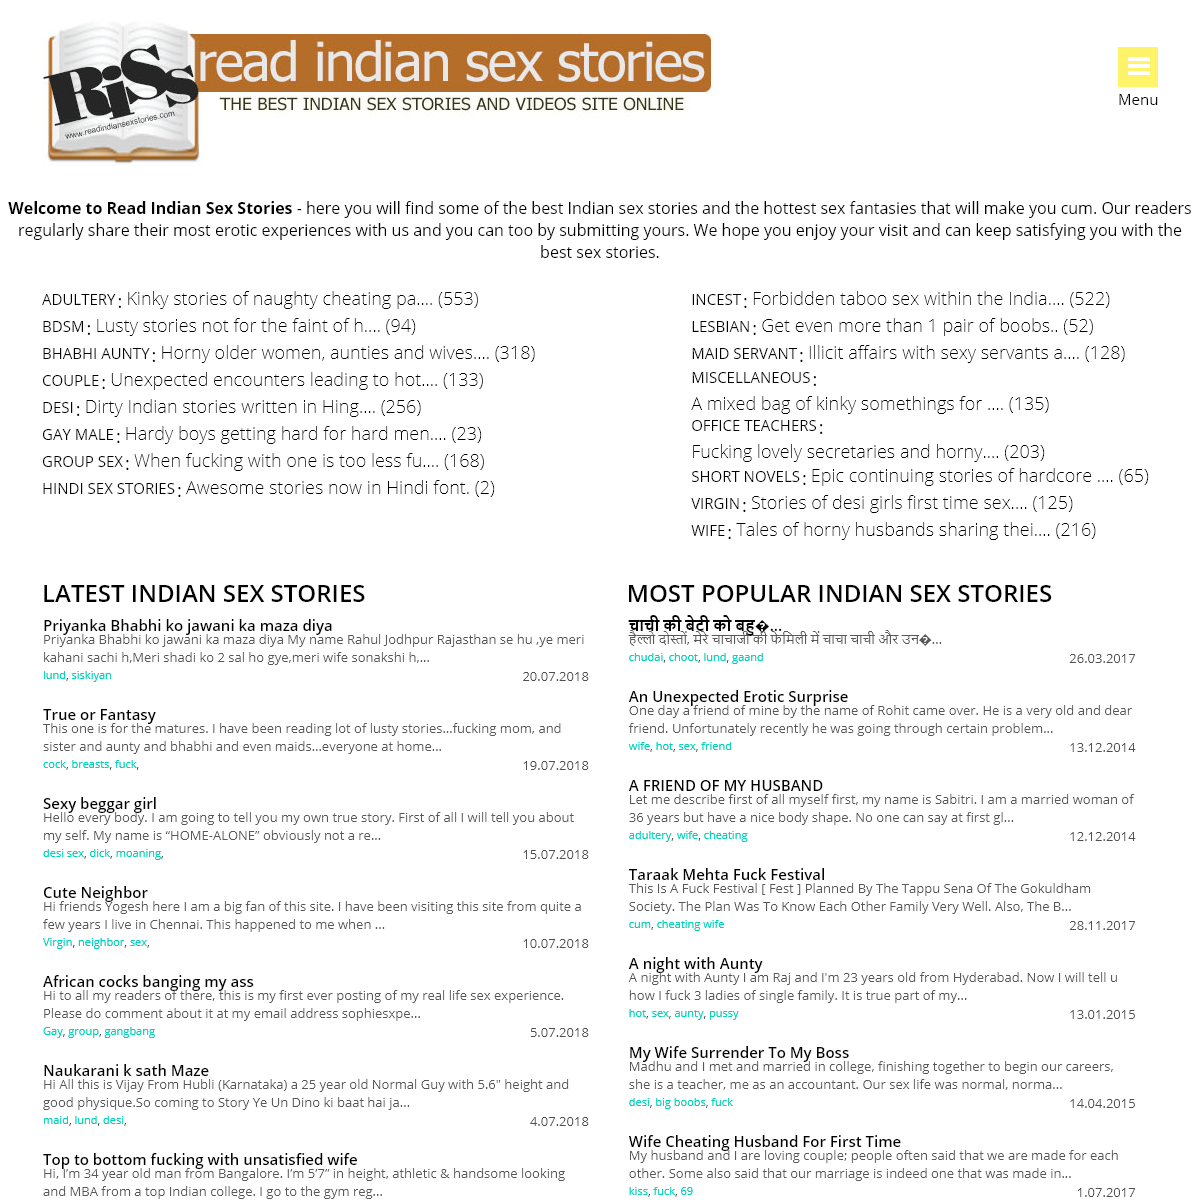 A complete backup of www.www.readindiansexstories.com